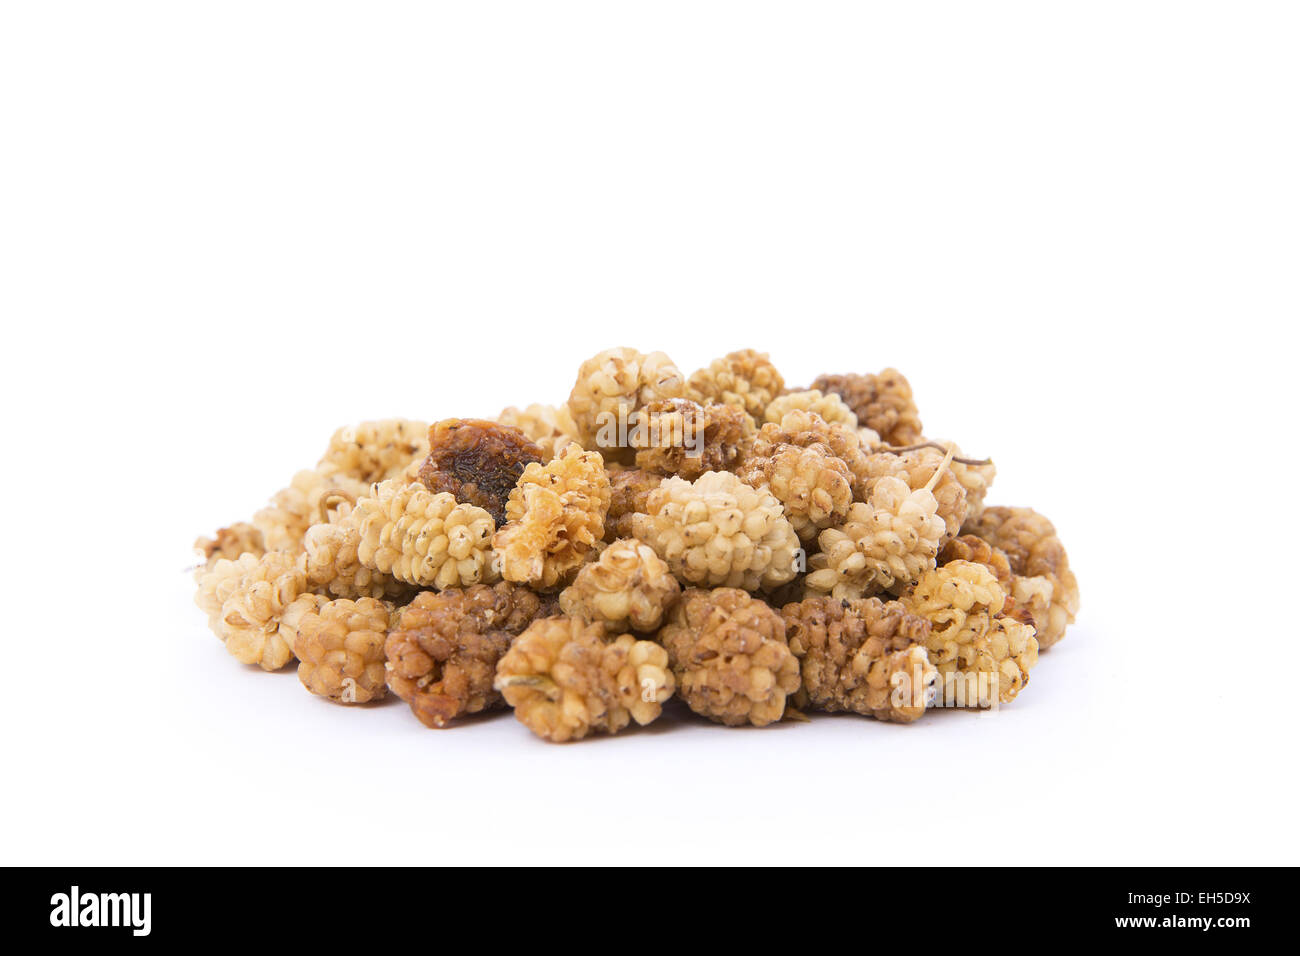 A pile / heap of raw organic mul berries on white background. Stock Photo